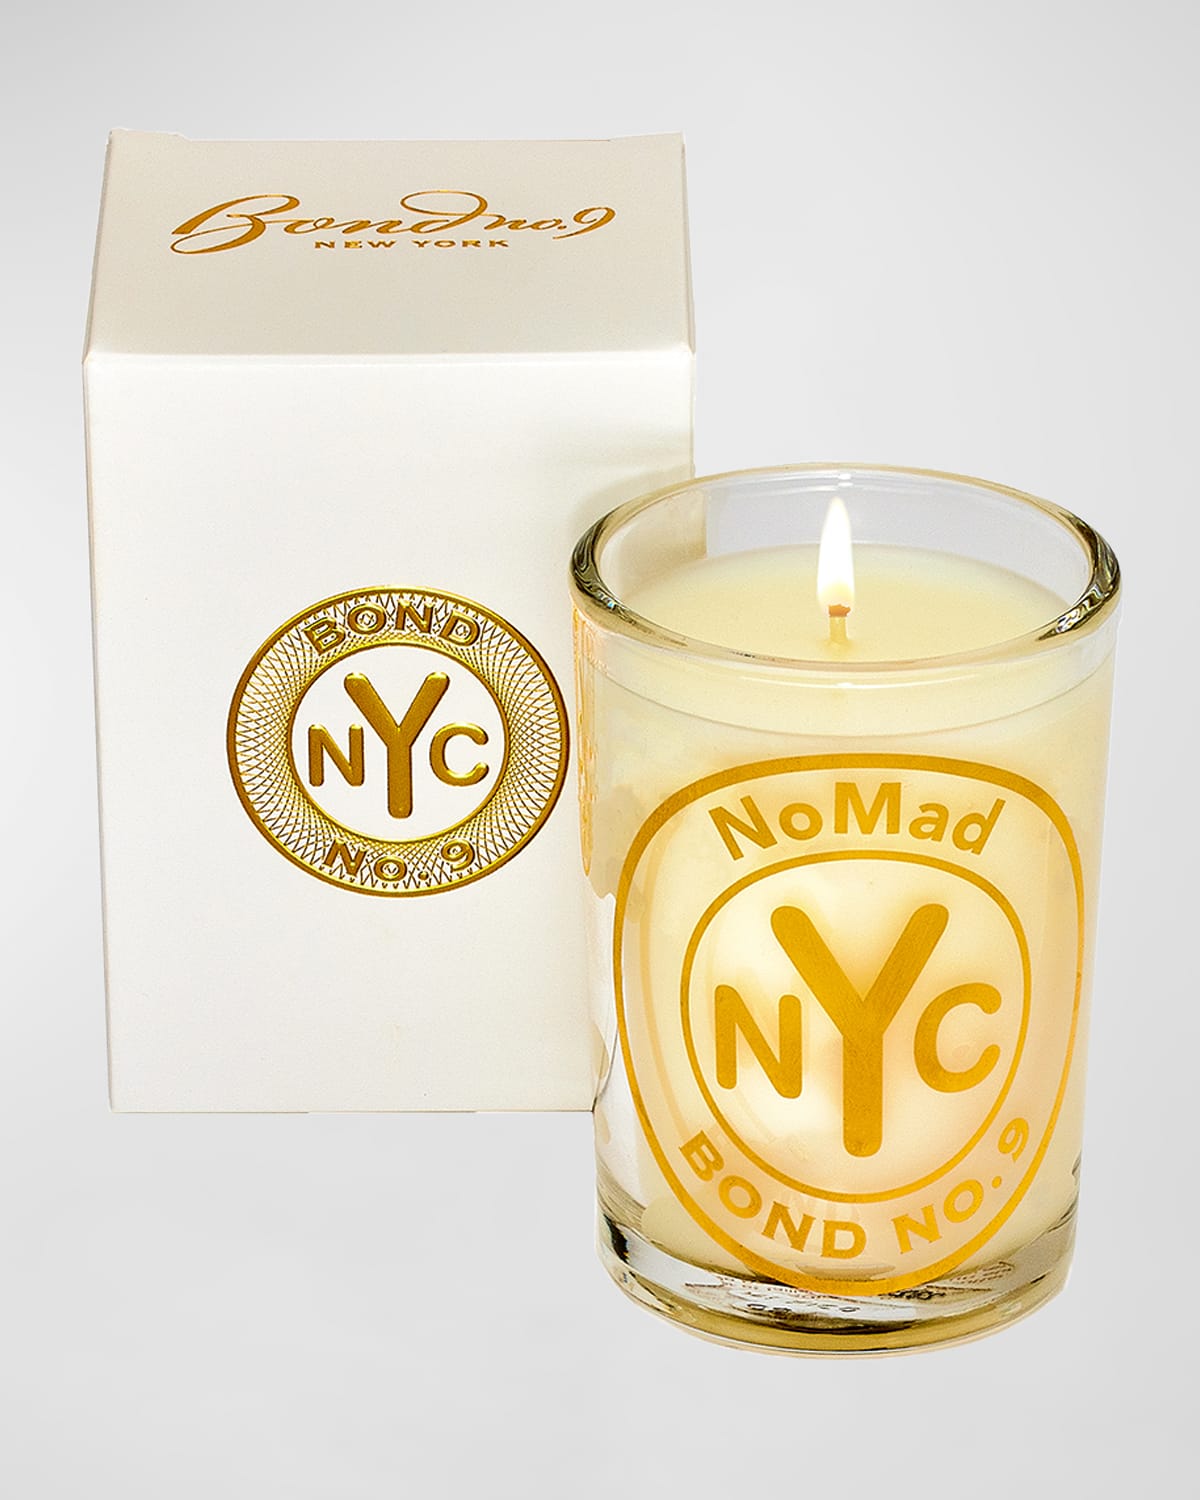 Bond No.9 New York Nomad Scented Candle Refill In Neutral